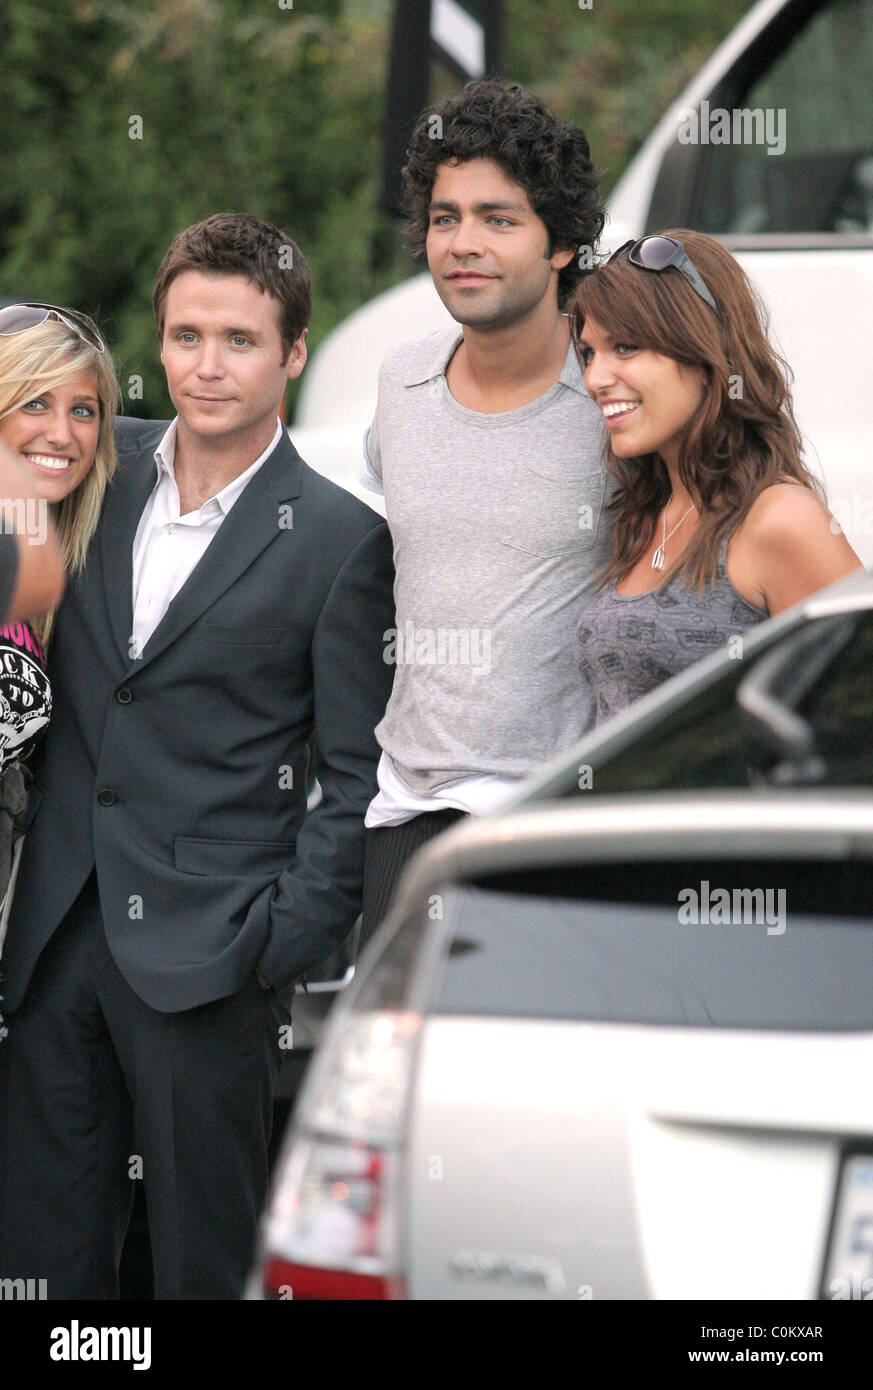 Kevin Connolly and Adrian Grenier on the set of the HBO series 'Entourage' Los Angeles, California - 18.08.08 Stock Photo